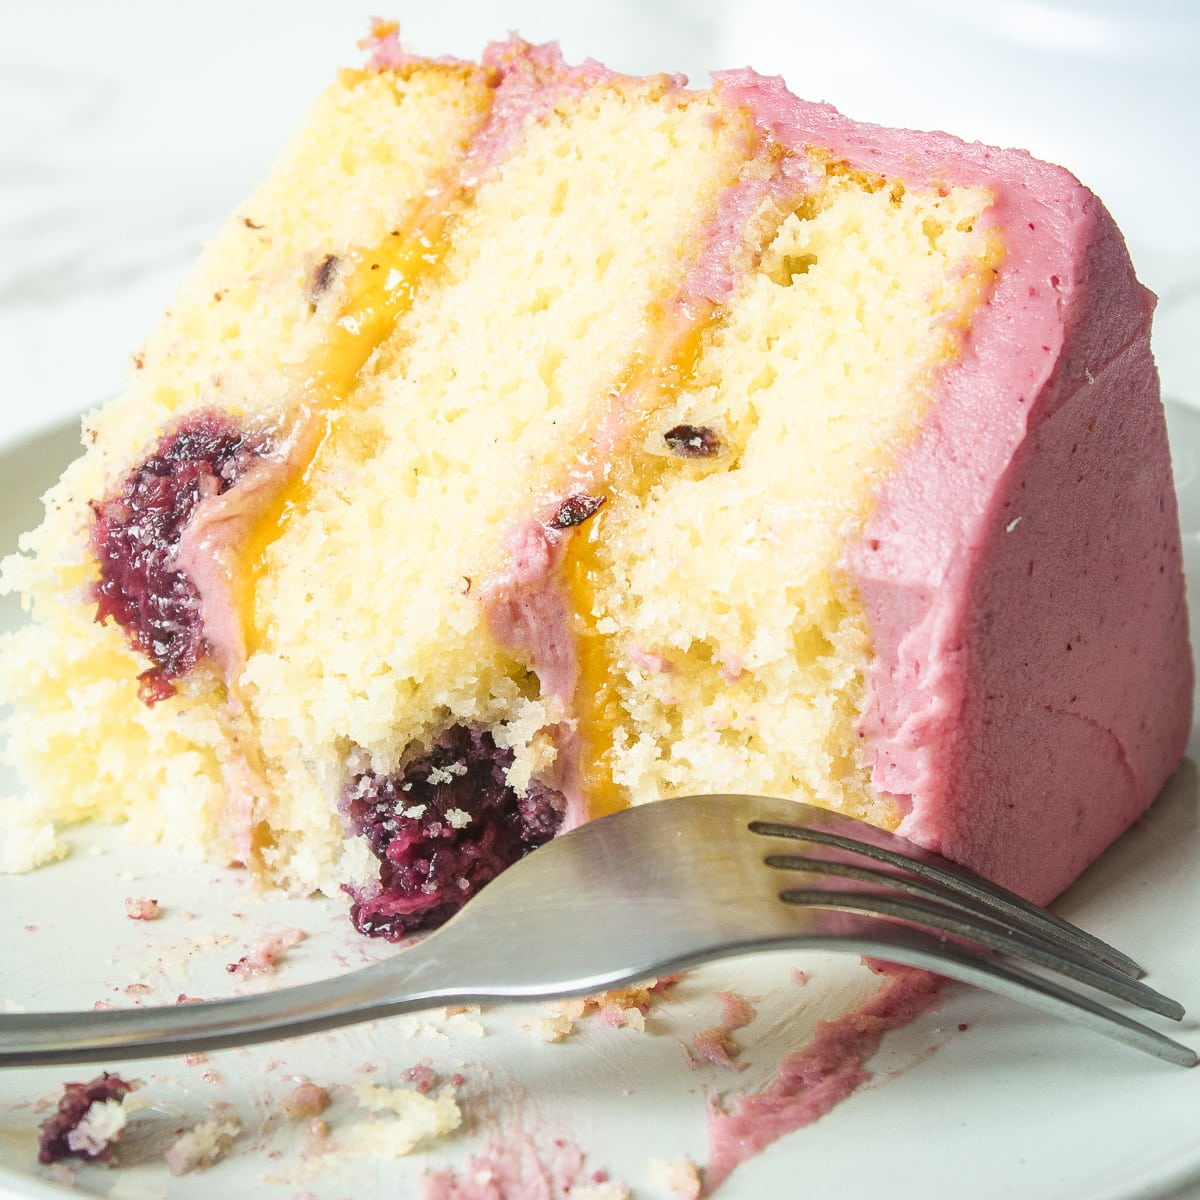 slice of lemon and blackberry cake on a plate with a couple bites taken out